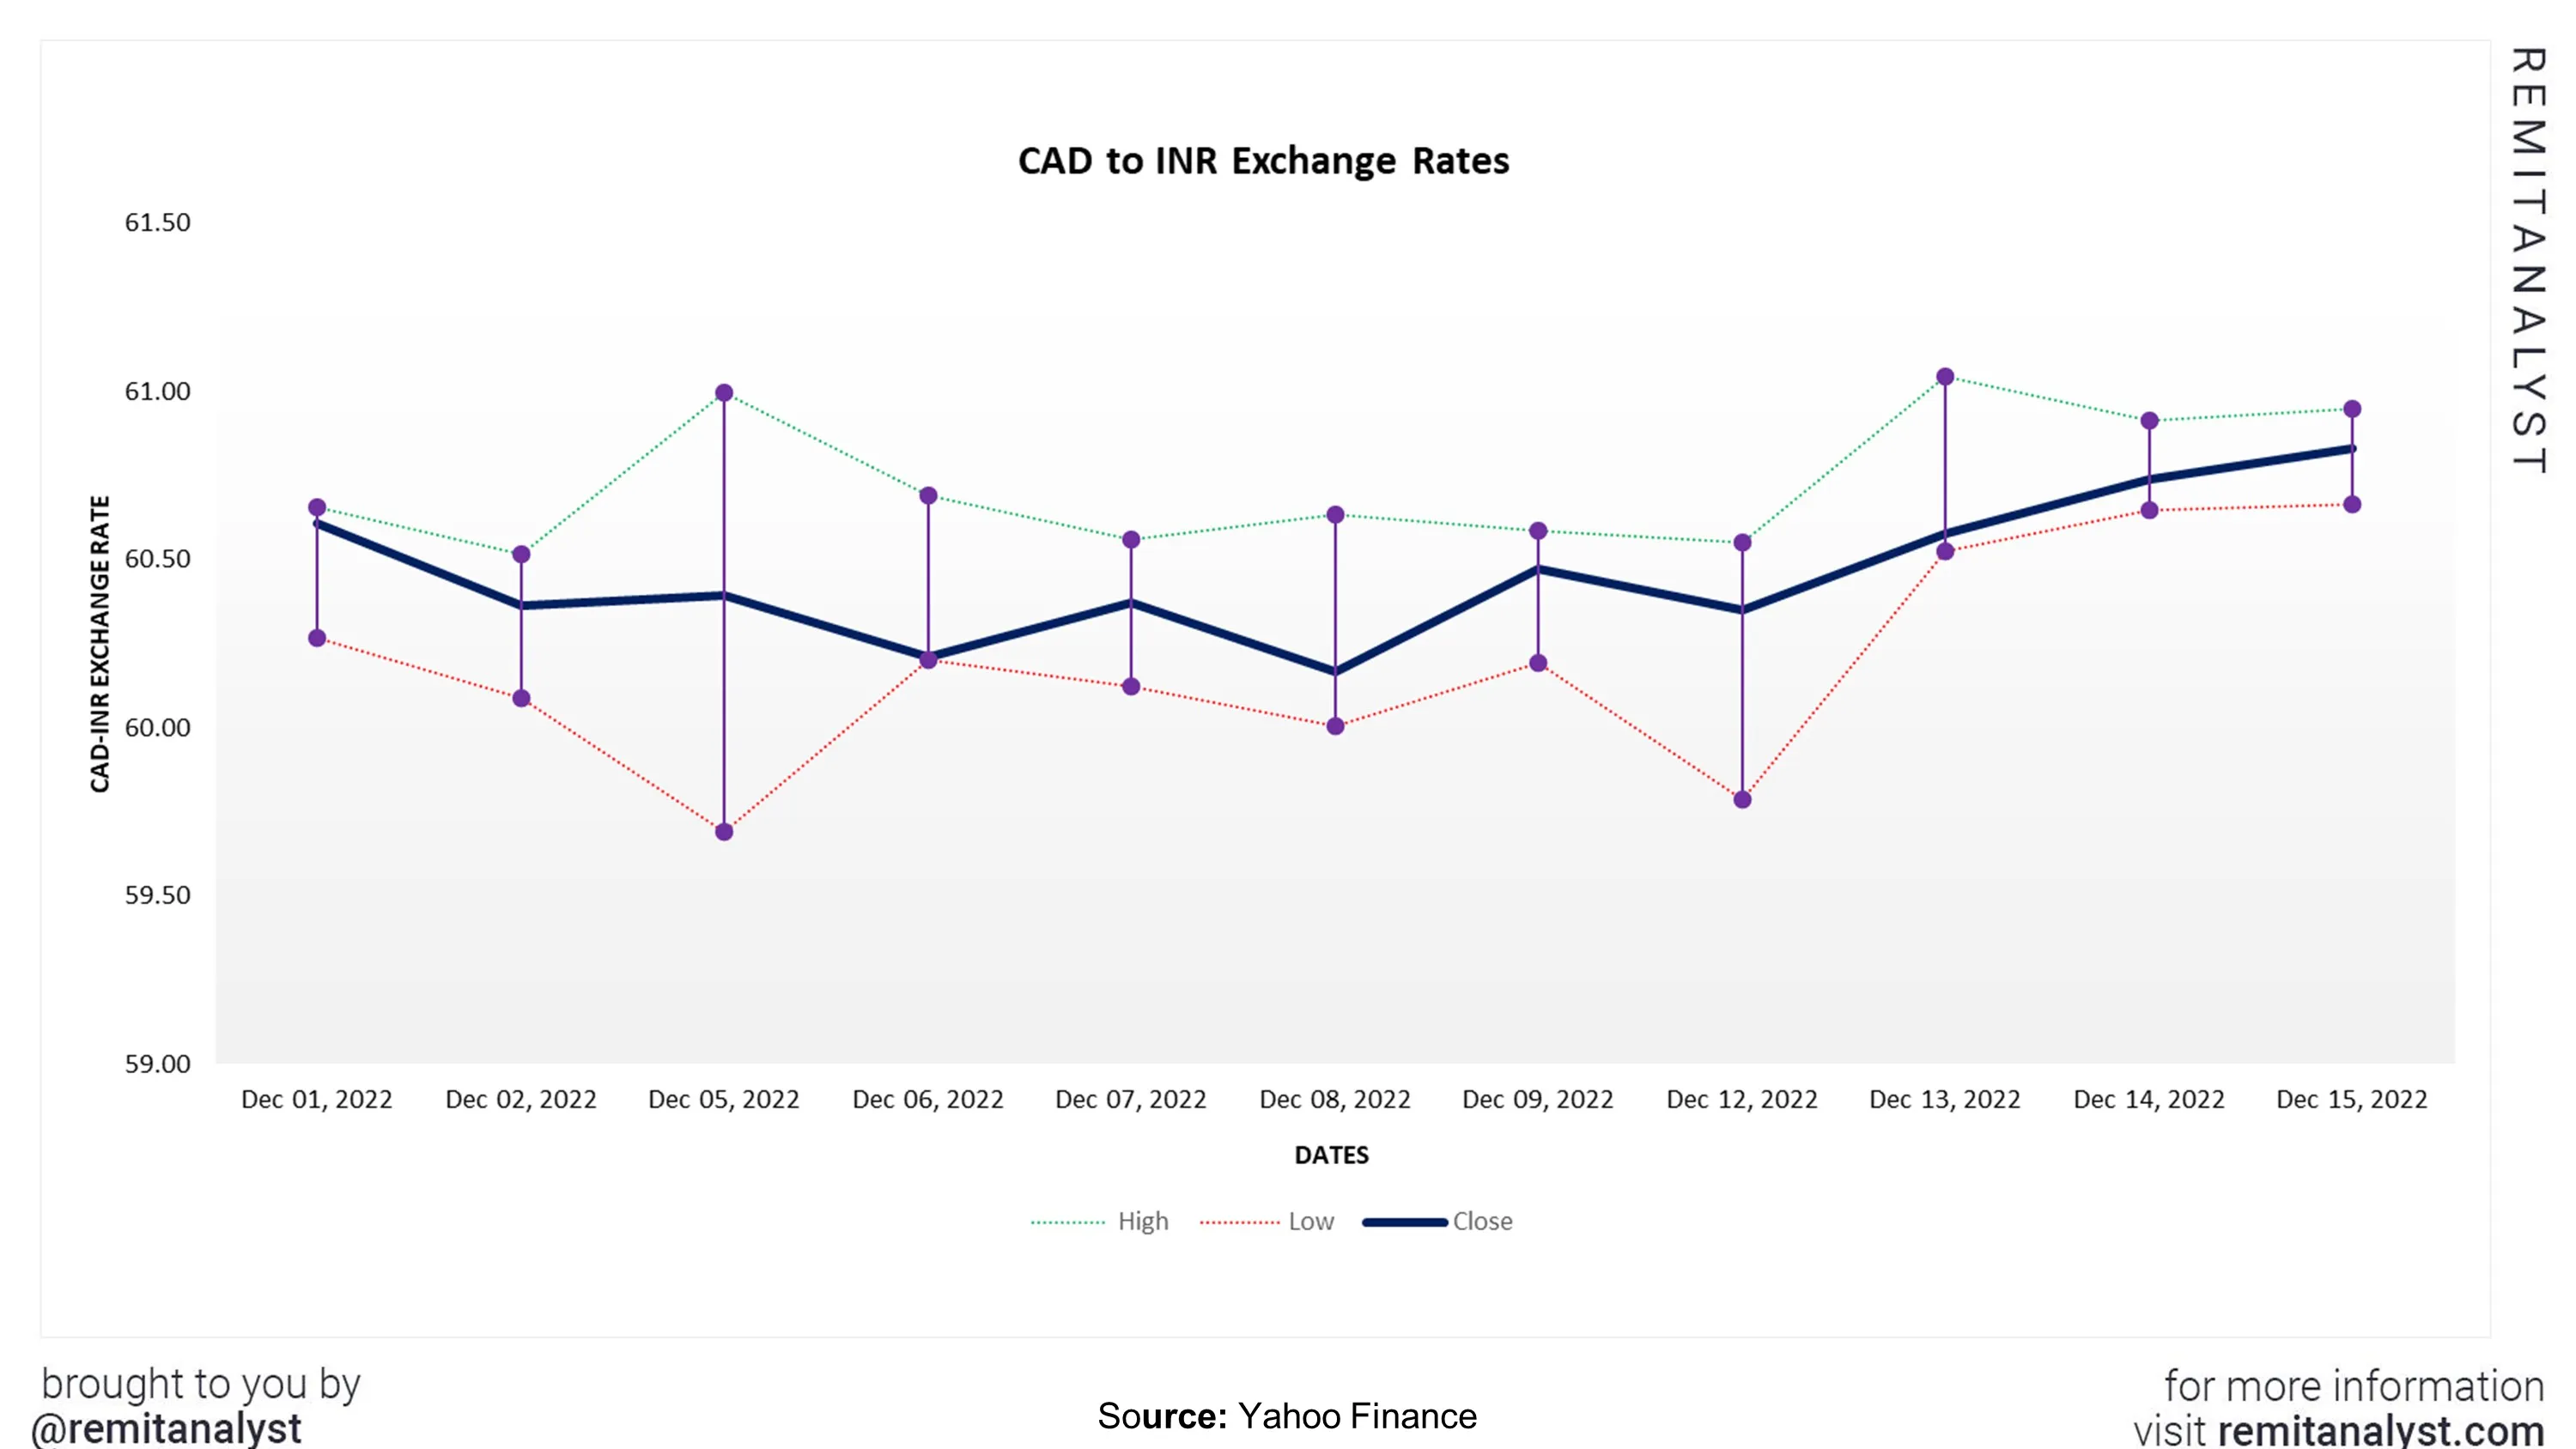 cad-to-inr-exchange-rate-from-1-dec-2022-to-15-dec-2022